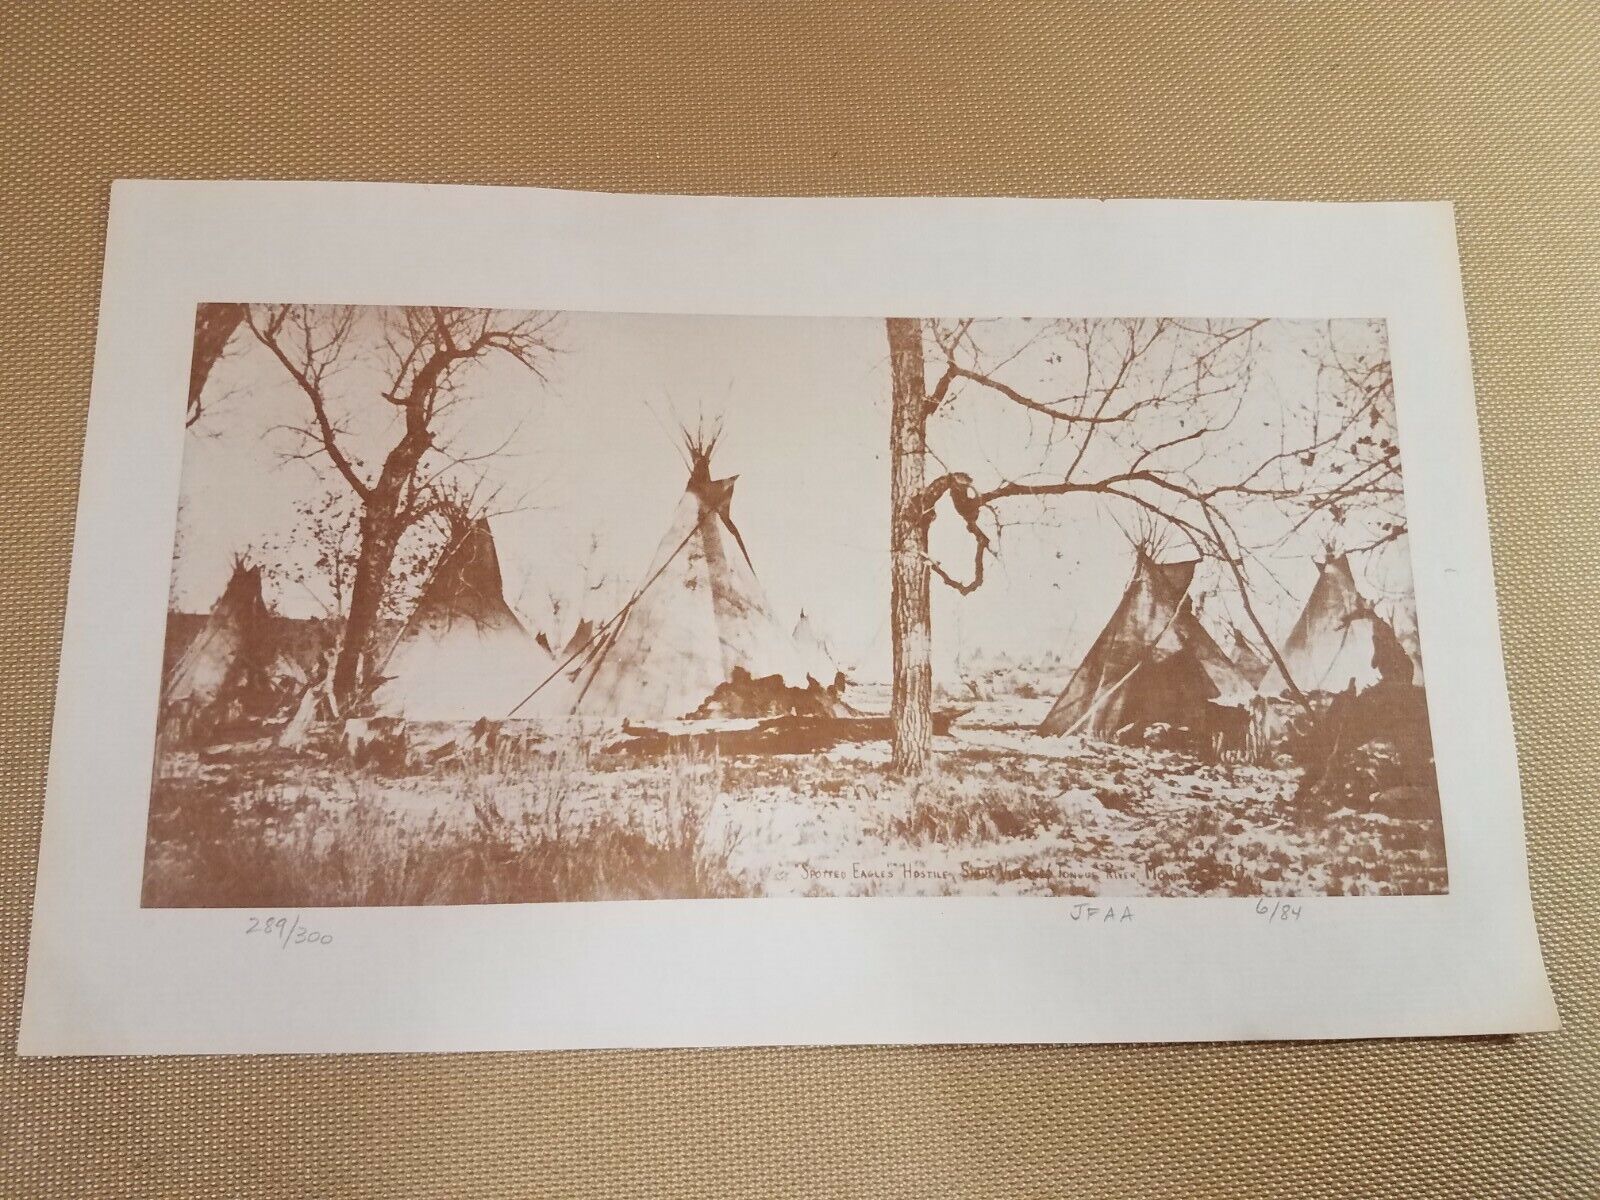 Vintage L.A. Huffman Spotted Eagle\'s Sioux Village Tongue River Photo JFAA Print